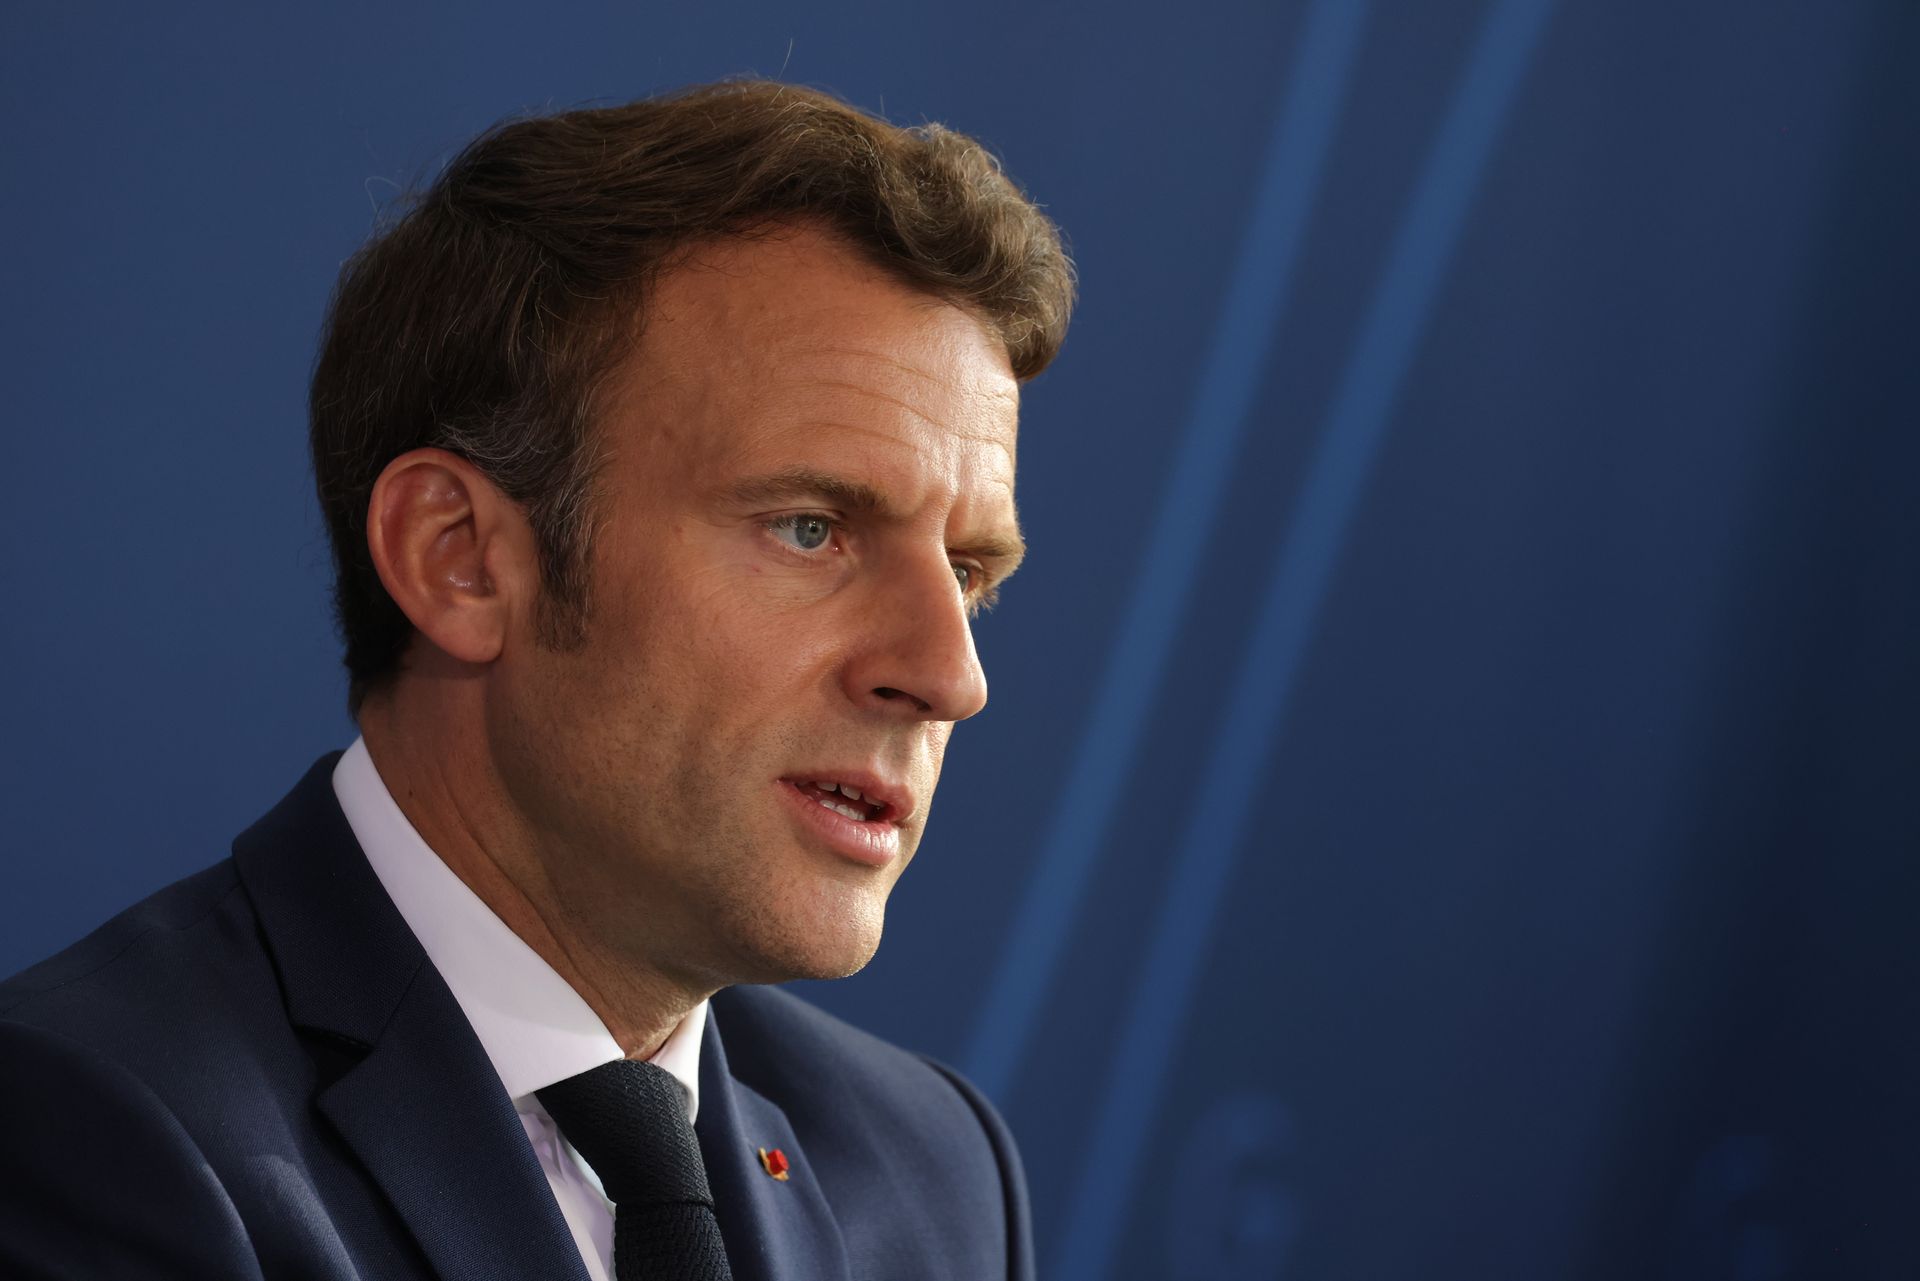 Macron is in the crosshairs